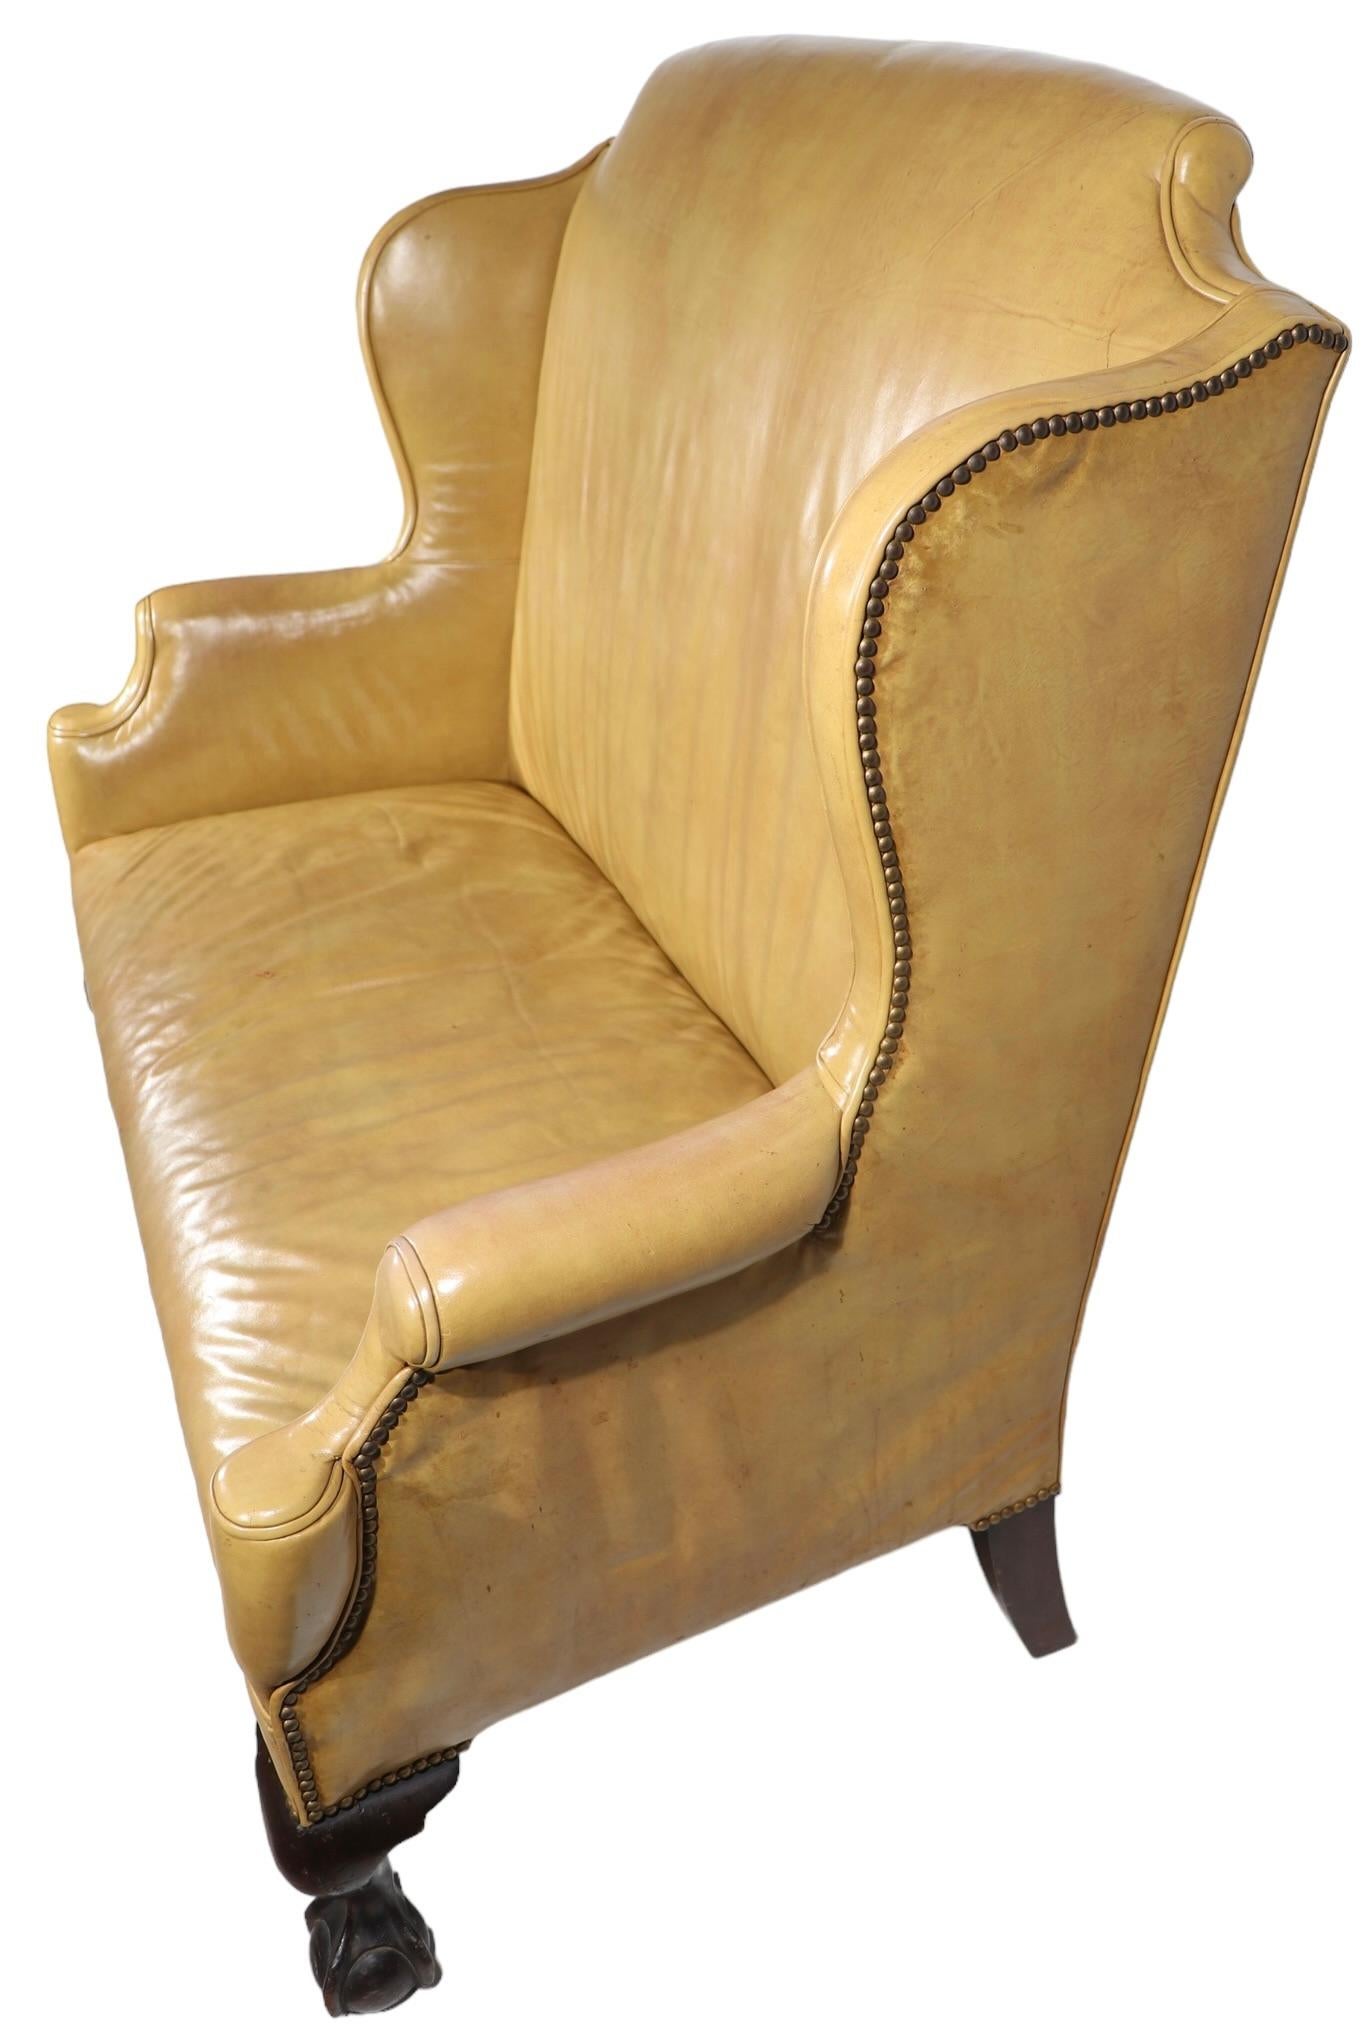 Chippendale Style Leather Loveseat from Ft. William Henry Hotel Lake George N.Y. For Sale 13